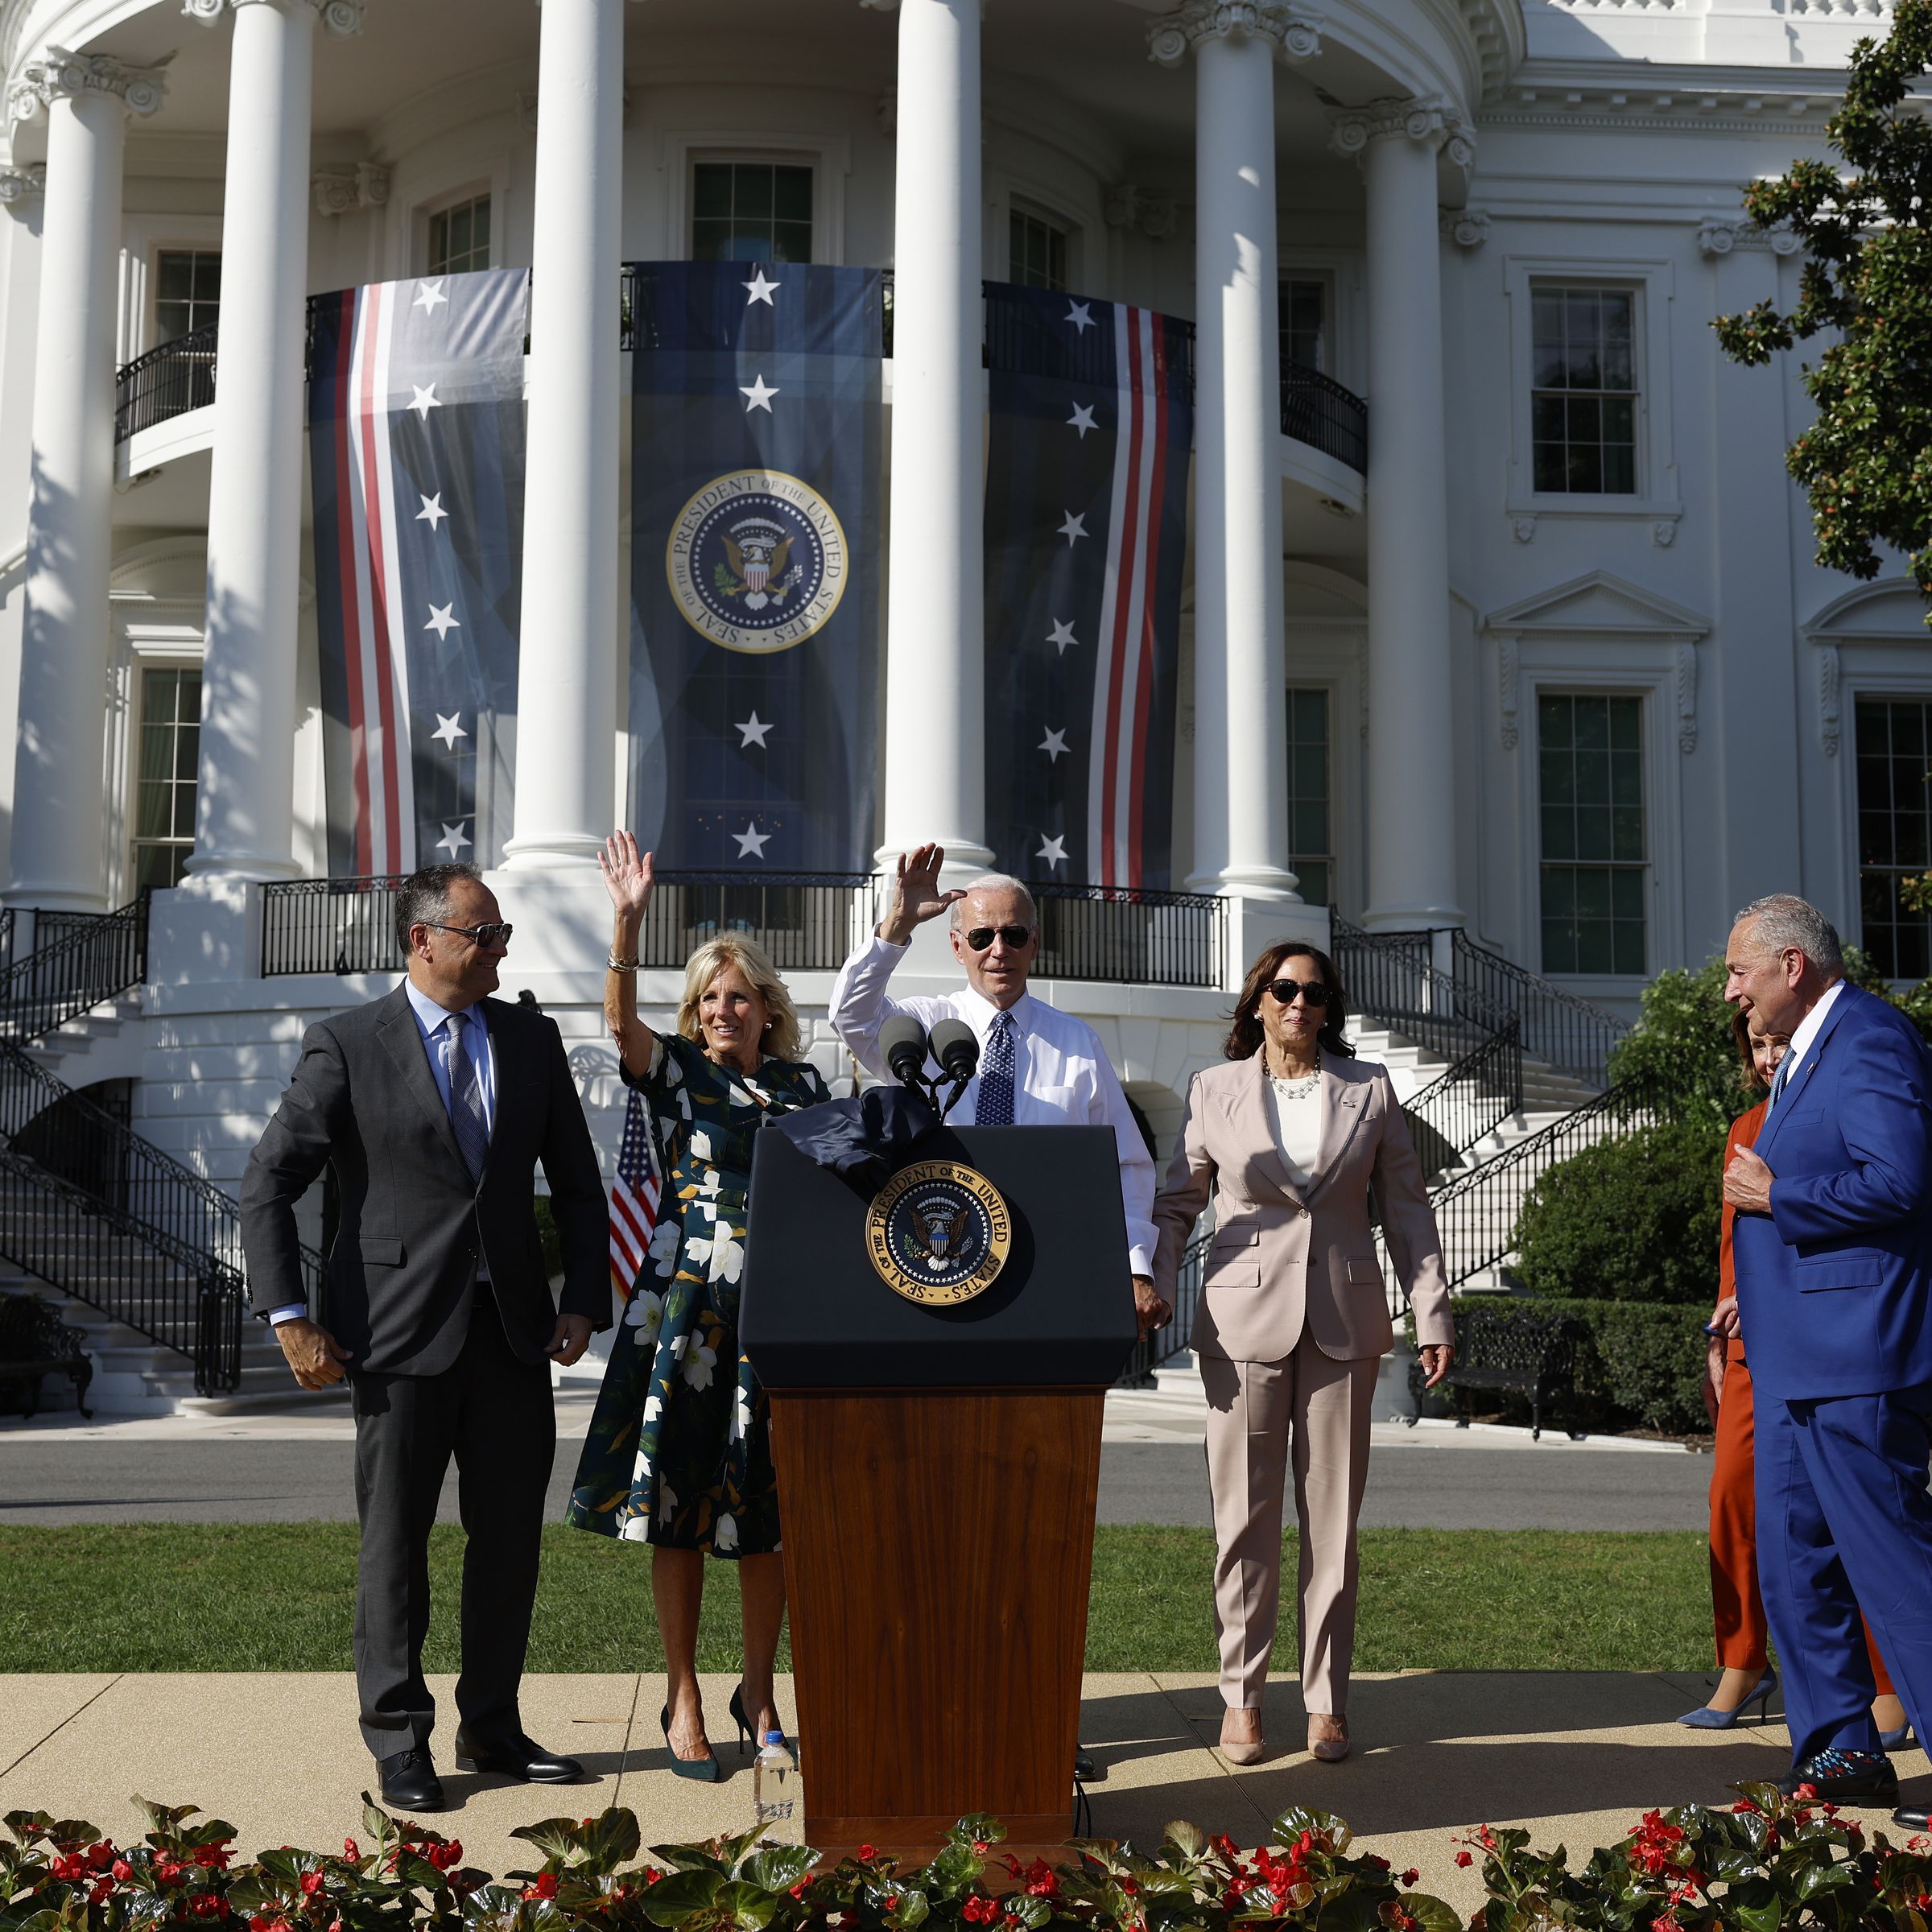 Joe Biden stands at a podium in front of the White House with people standing behind him.